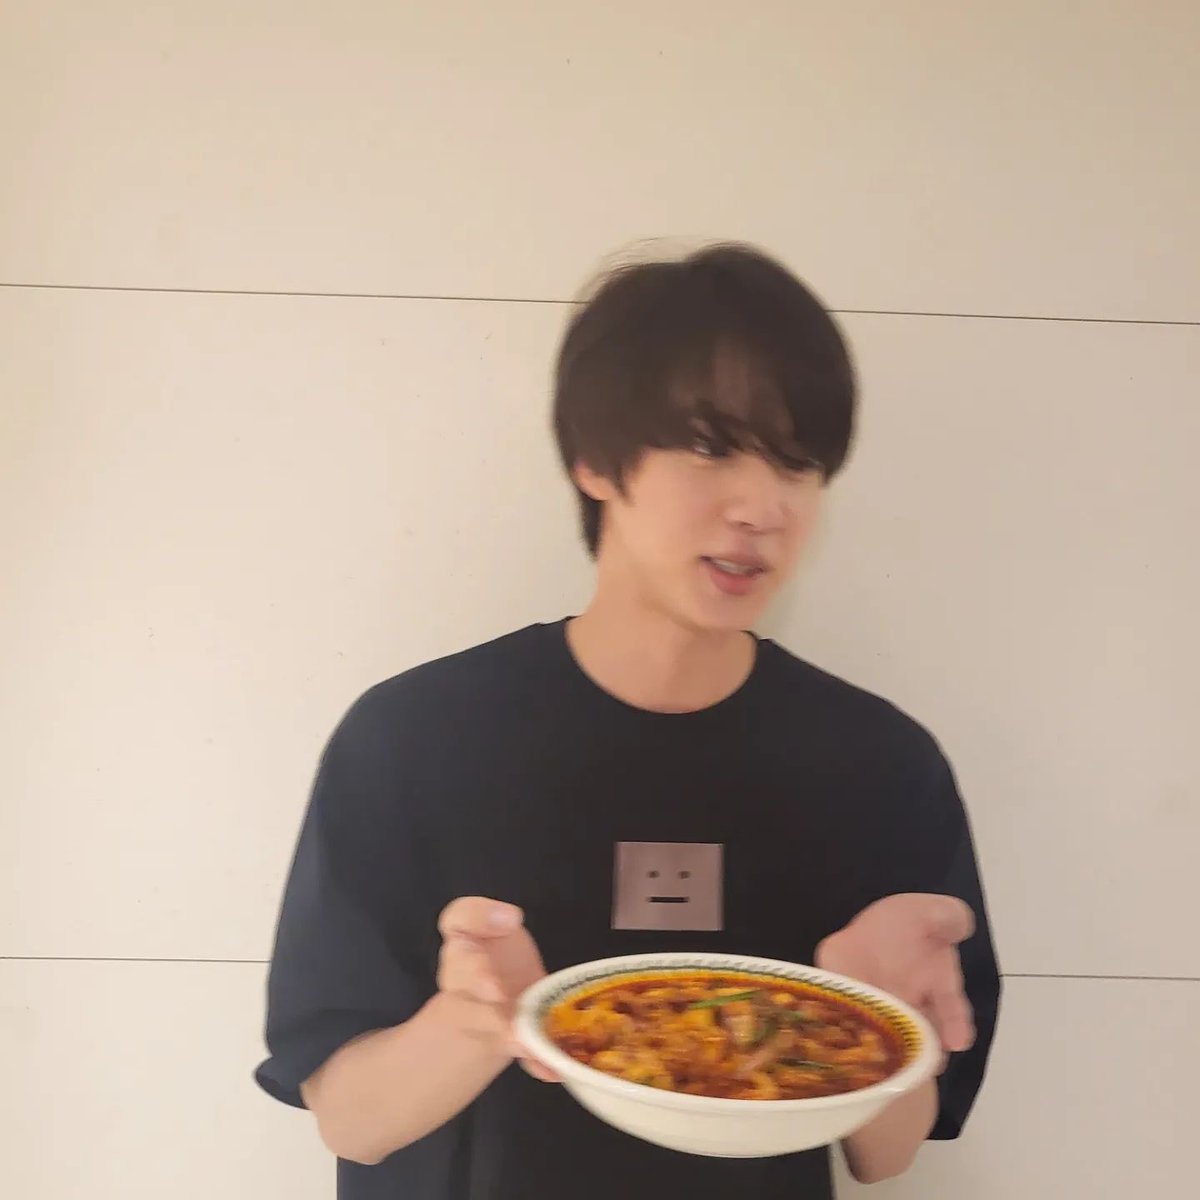 [jin] instagram post 🐹 stir fried octopus that jhope made (bought) for me